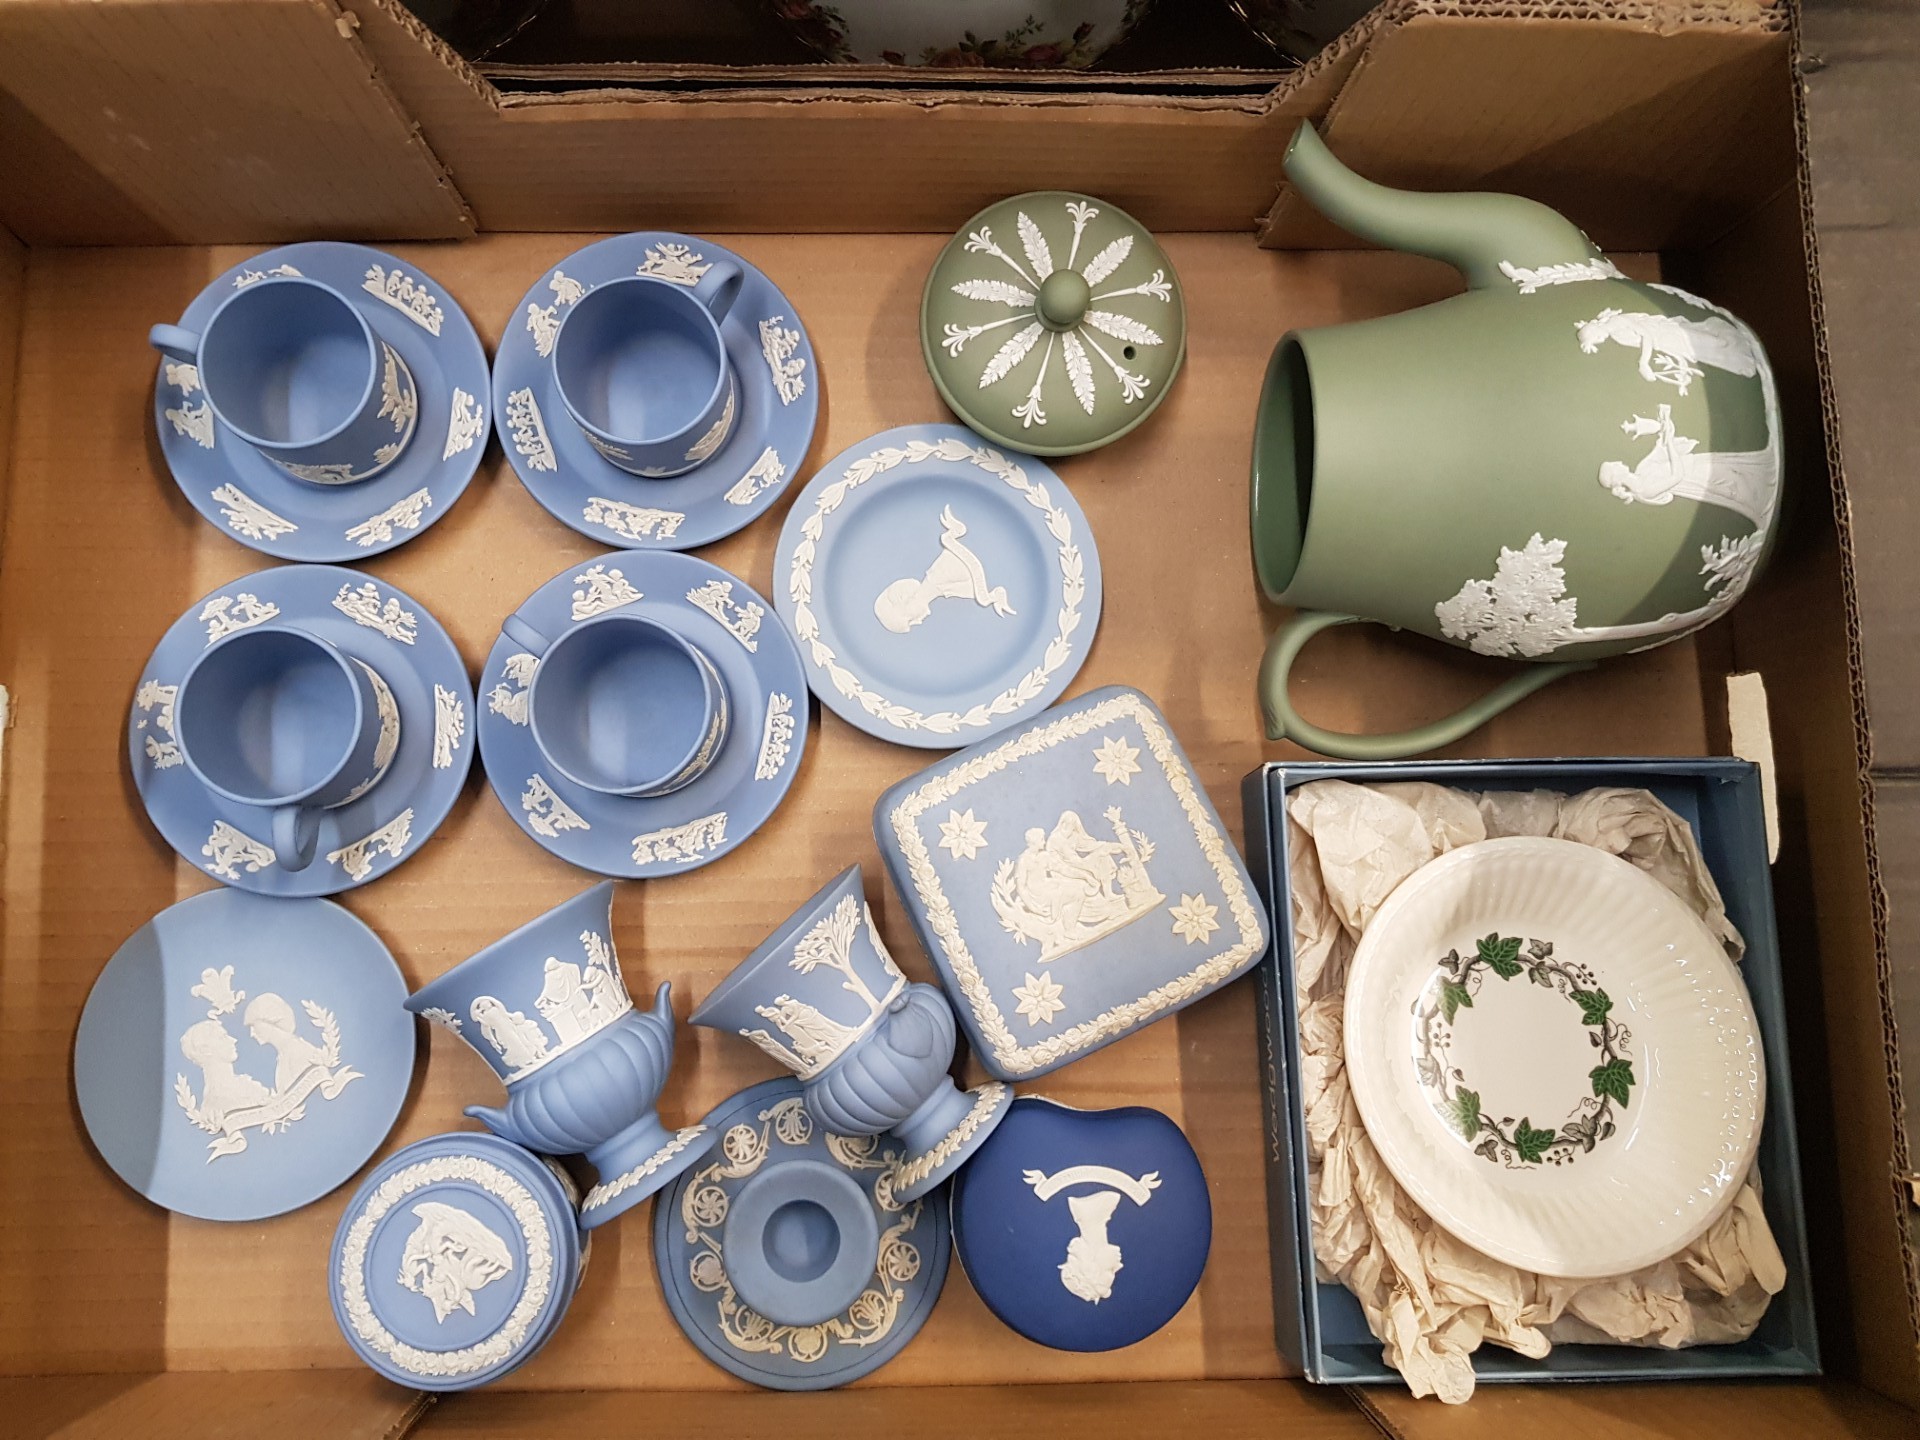 Wedgwood jasperware items to include sage green coffee pot, set of 4 blue jasper coffee cans and